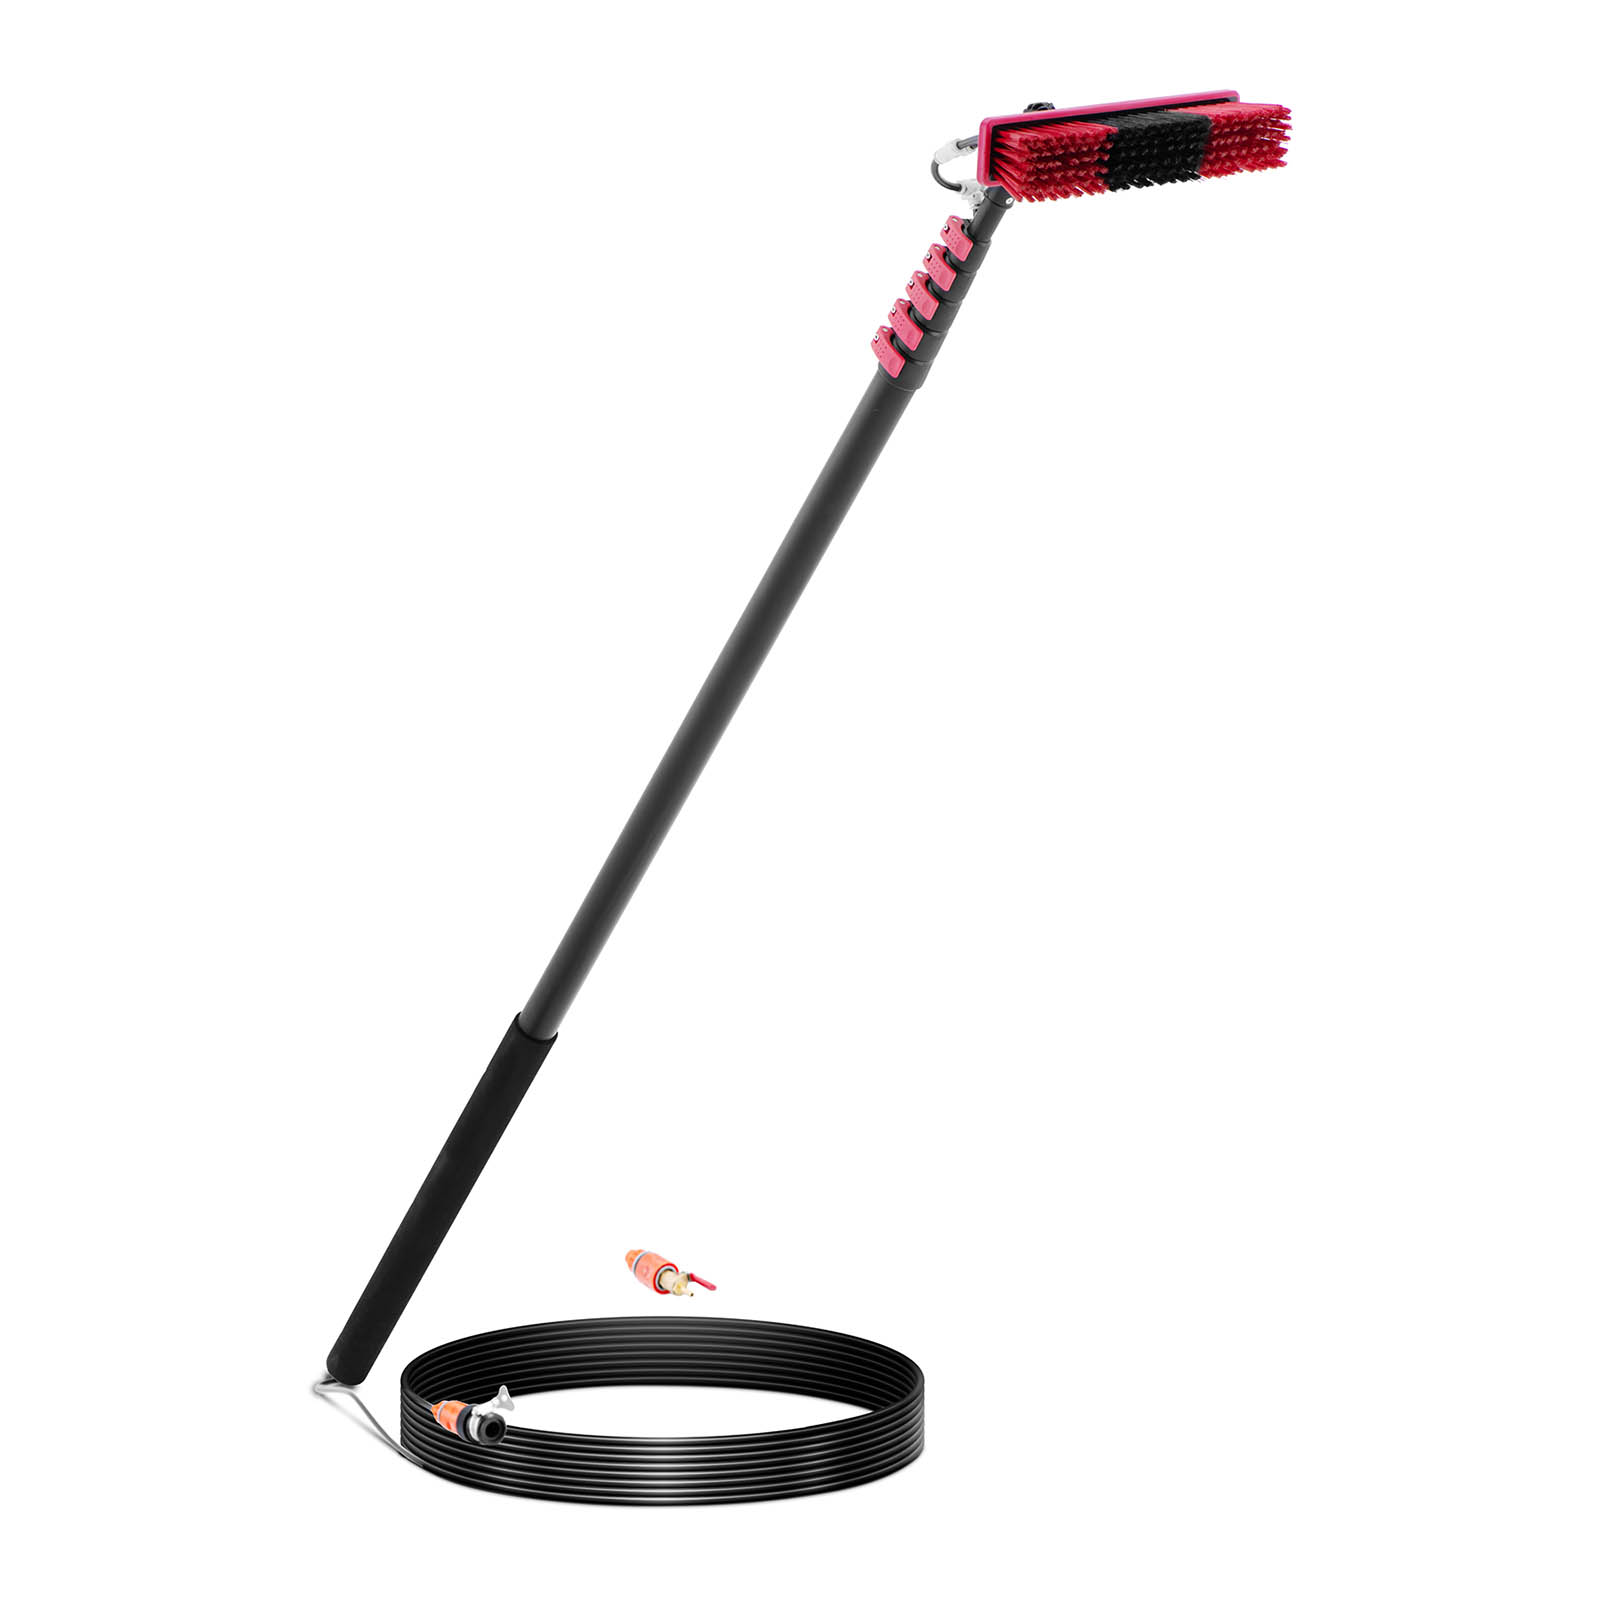 Telescopic Brush - with water connection - for solar panels and windows - 1800 - 9050 mm